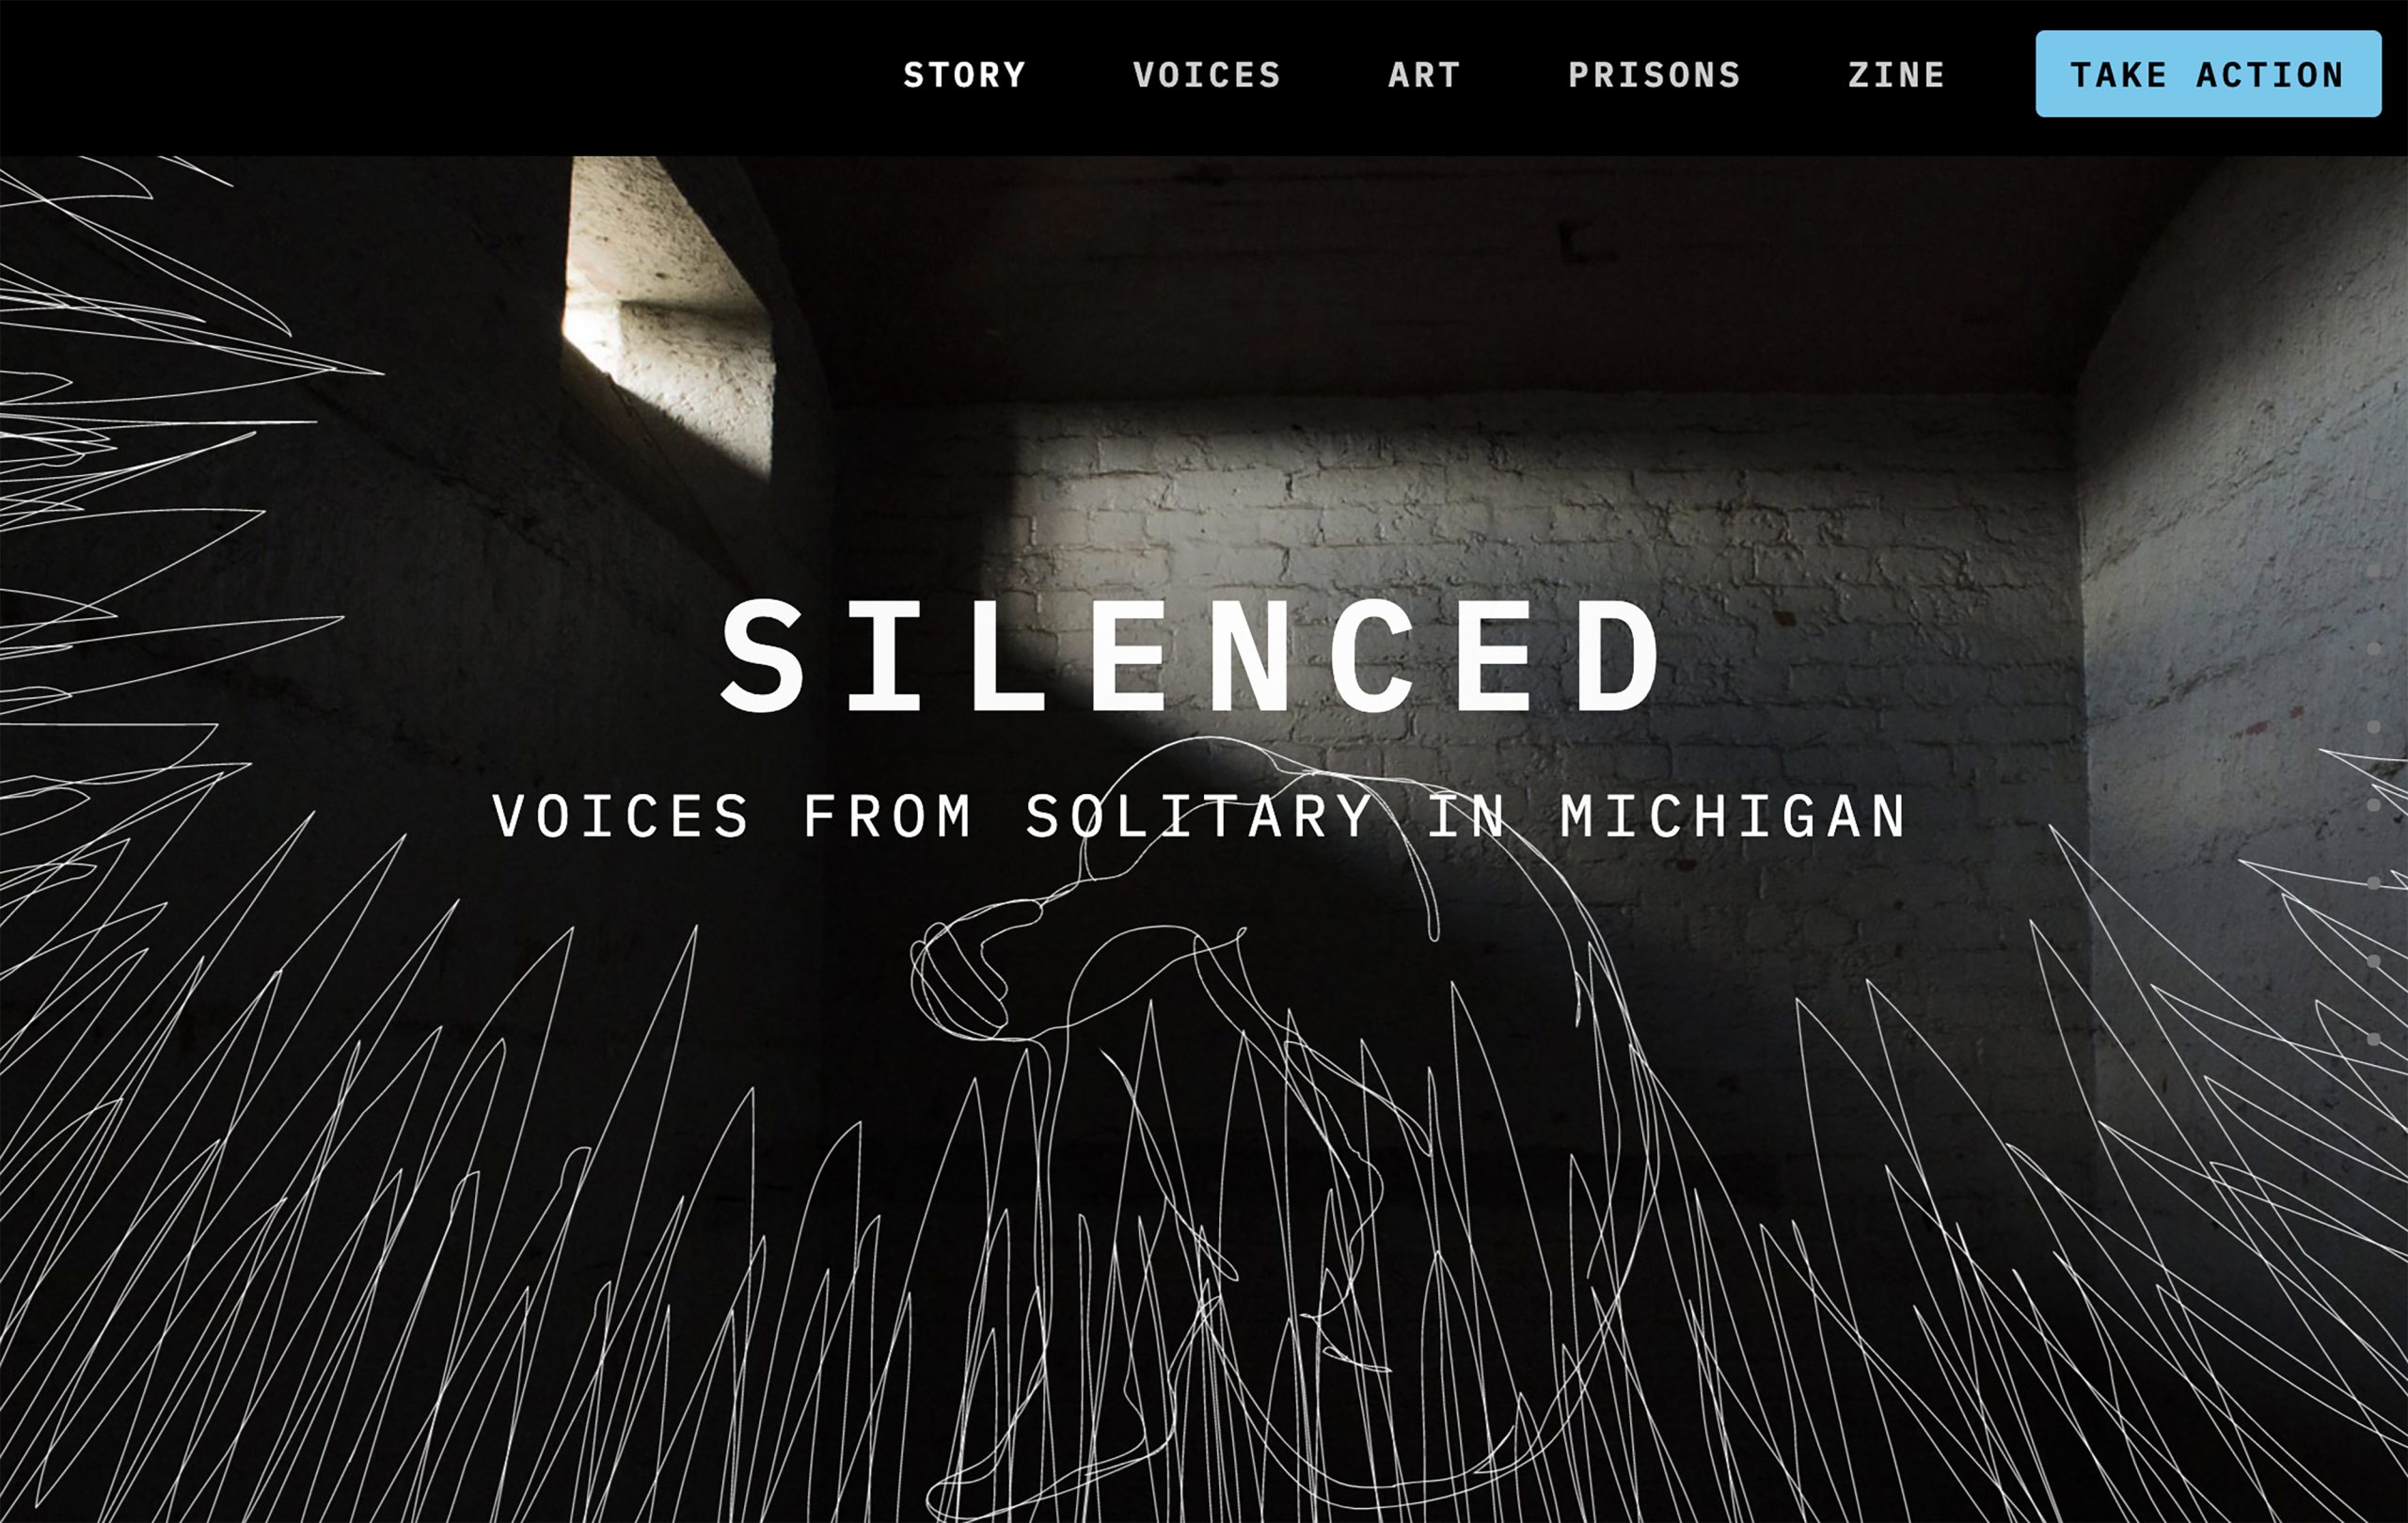 Screenshot of Silenced website shows a photograph of a solitary confinement cell with light coming into the darkness from a window above, and a digital illustration in white outline of a person in a seated position with head on knees, surrounded by white lines like static surrounding the figure. The words Silenced: Voices from Solitary in Michigan appear at the top.